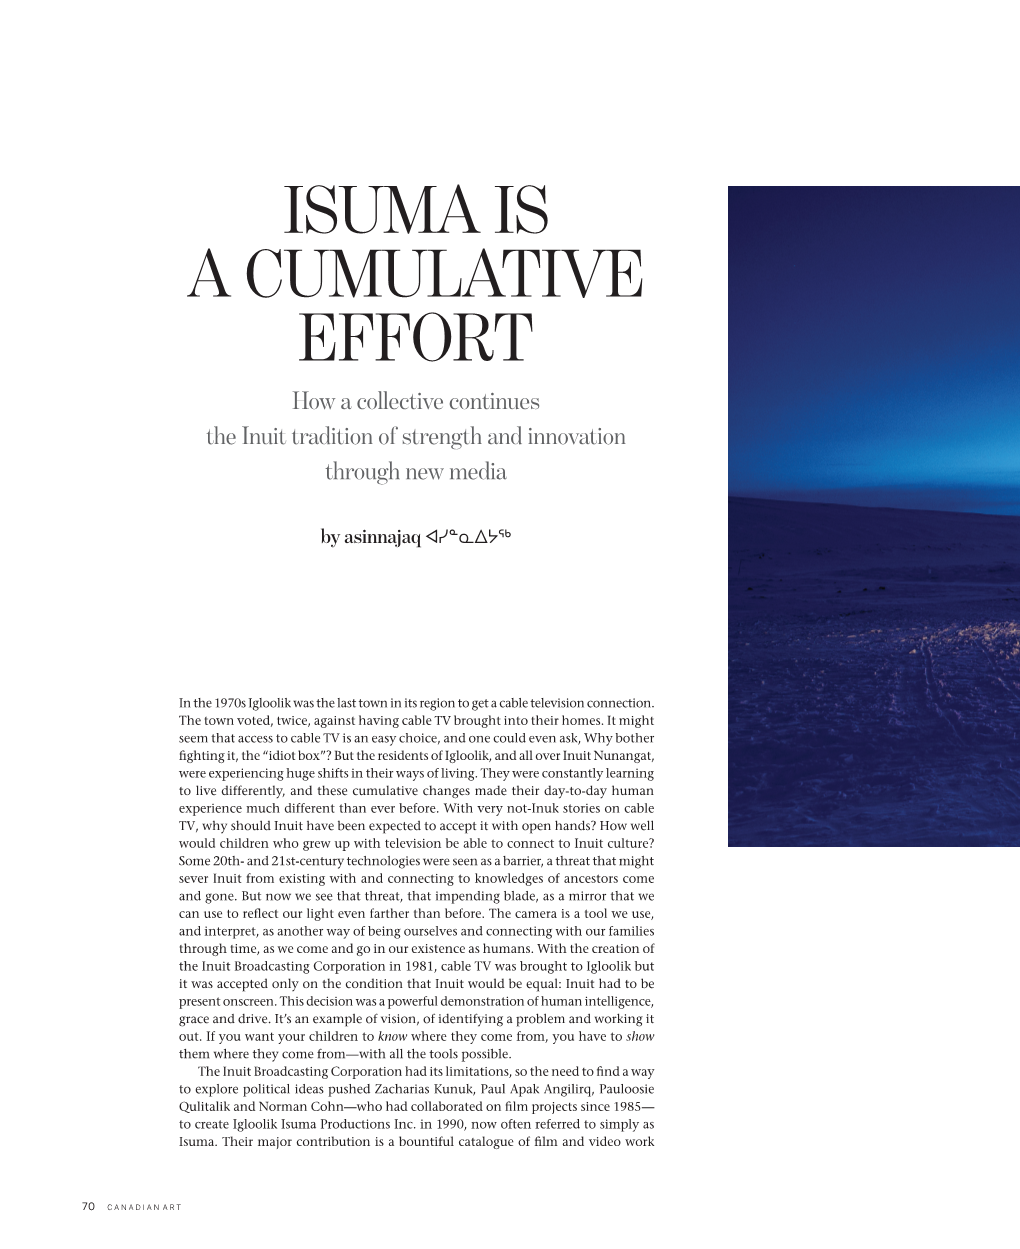 ISUMA IS a CUMULATIVE EFFORT How a Collective Continues the Inuit Tradition of Strength and Innovation Through New Media